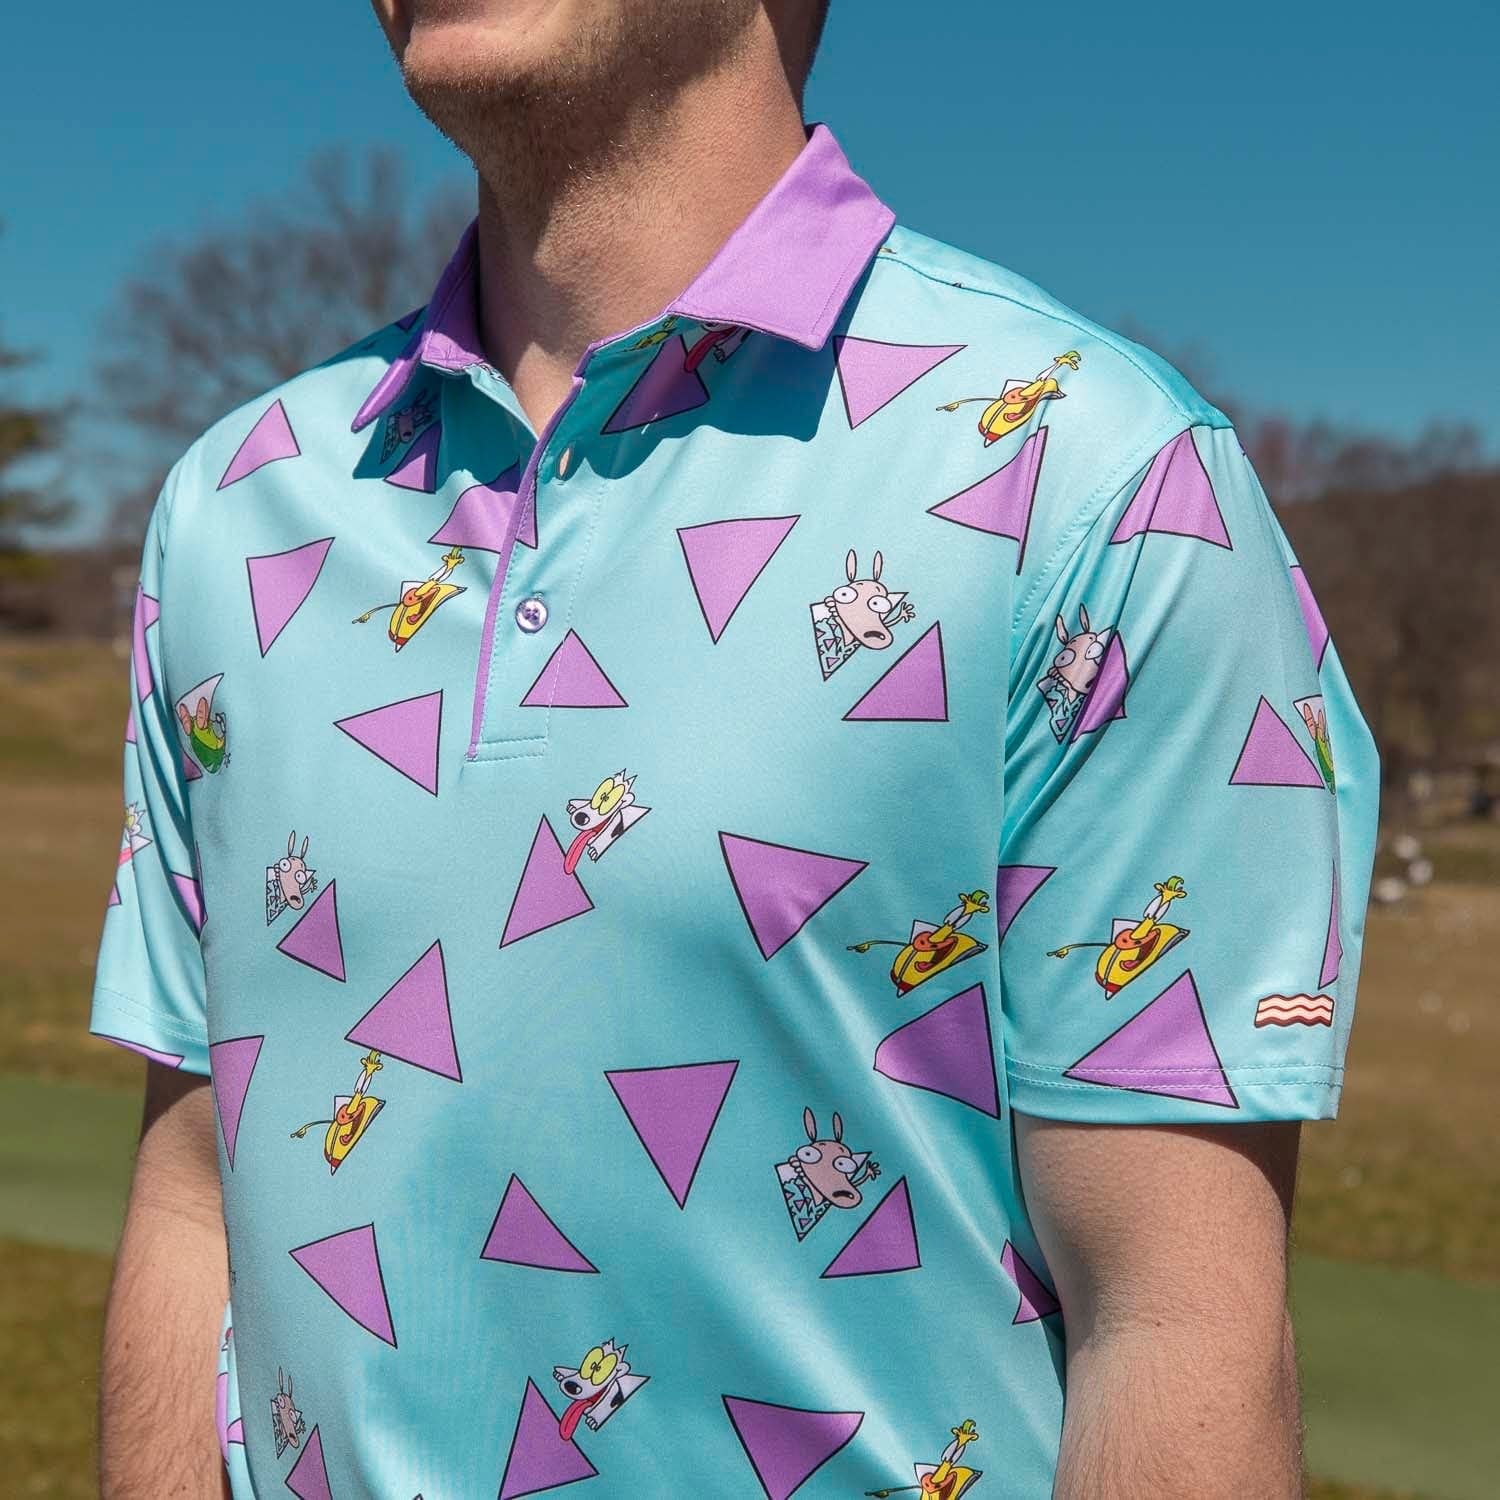 It's a Cowabunga Summer with RSVLTS Breakfast Balls All-Day Polos 